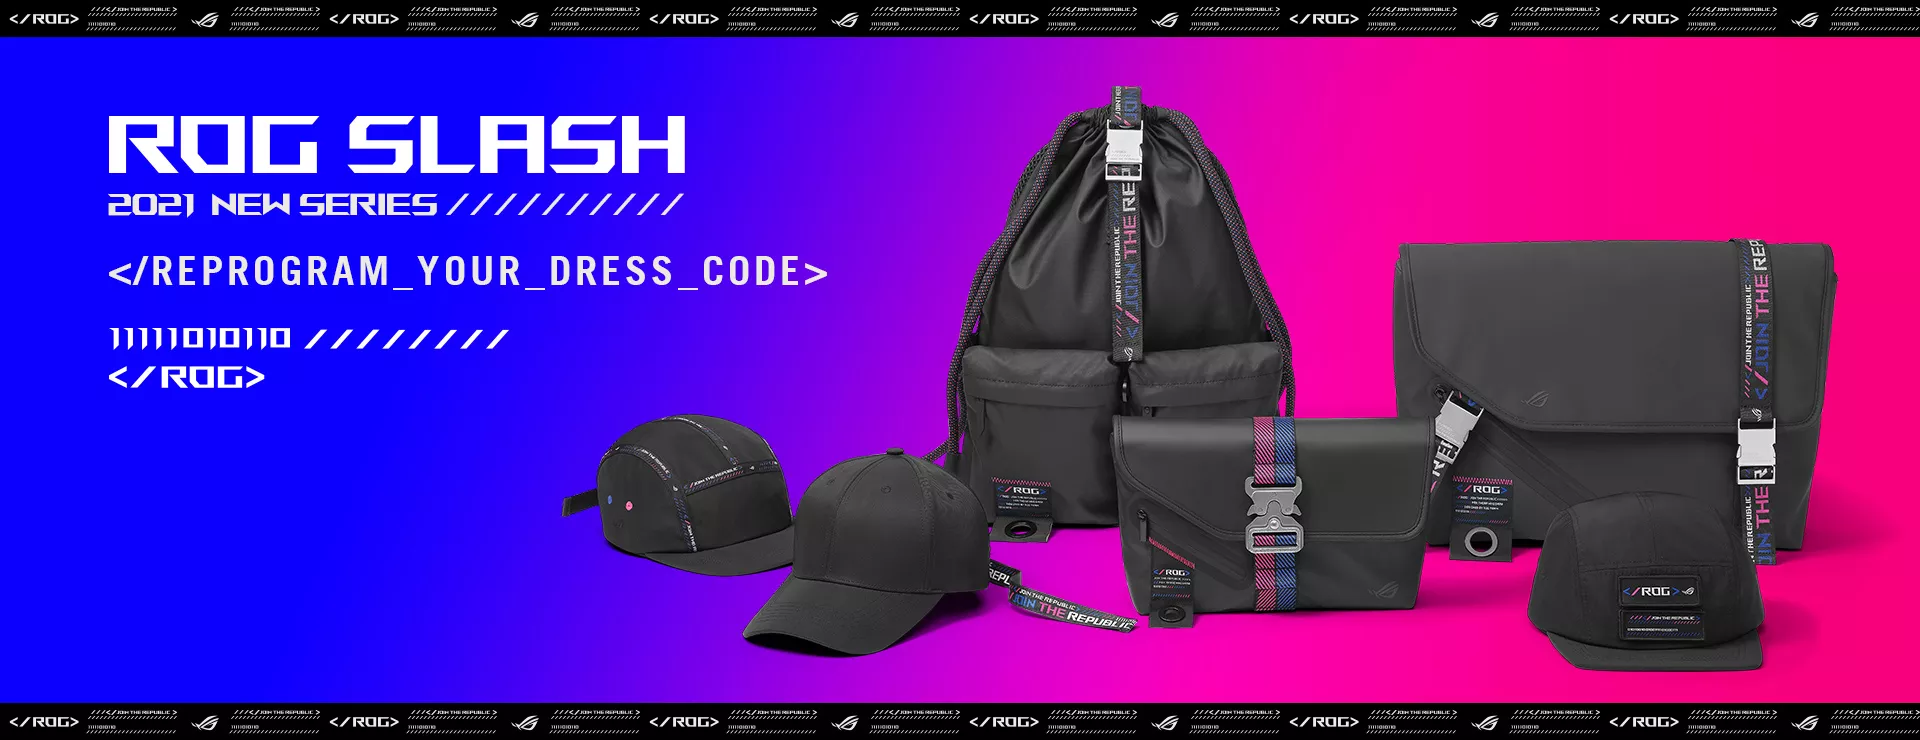 ROG Slash 2021 series accessories: ROG SLASH Multi-use Drawstring Bag, ROG SLASH Classic Messenger Bag, ROG SLASH Sling Bag, ROG SLASH Swappable Label Cap, ROG SLASH Inside Out Camp Cap, and ROG SLASH Classic Baseball Cap are placed in front of a colorful background which is inspired by classic red and blue esports tournament colors.